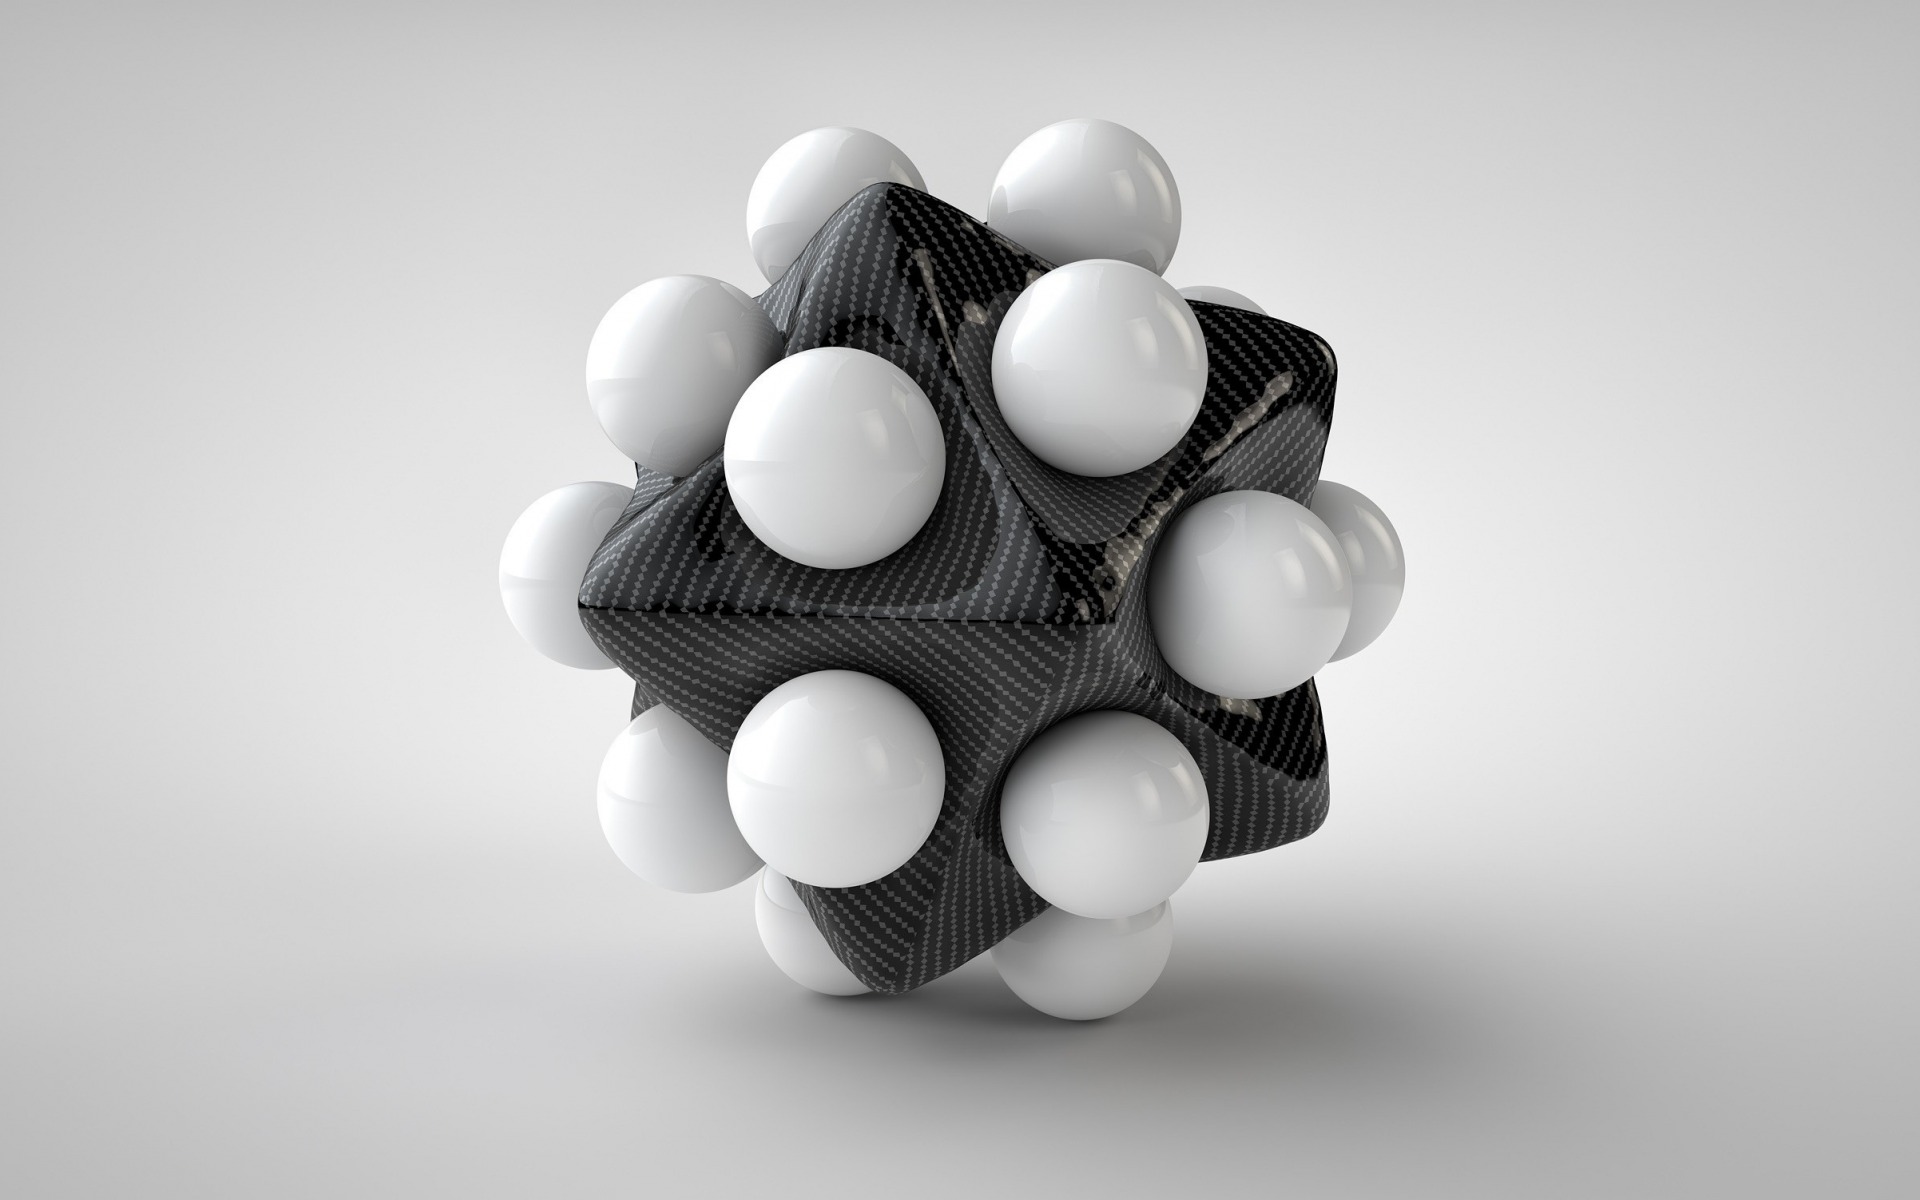 Download wallpaper 3D carbon star, white balls, white 3D sphere, 3D objects for desktop with resolution 1920x1200. High Quality HD picture wallpaper